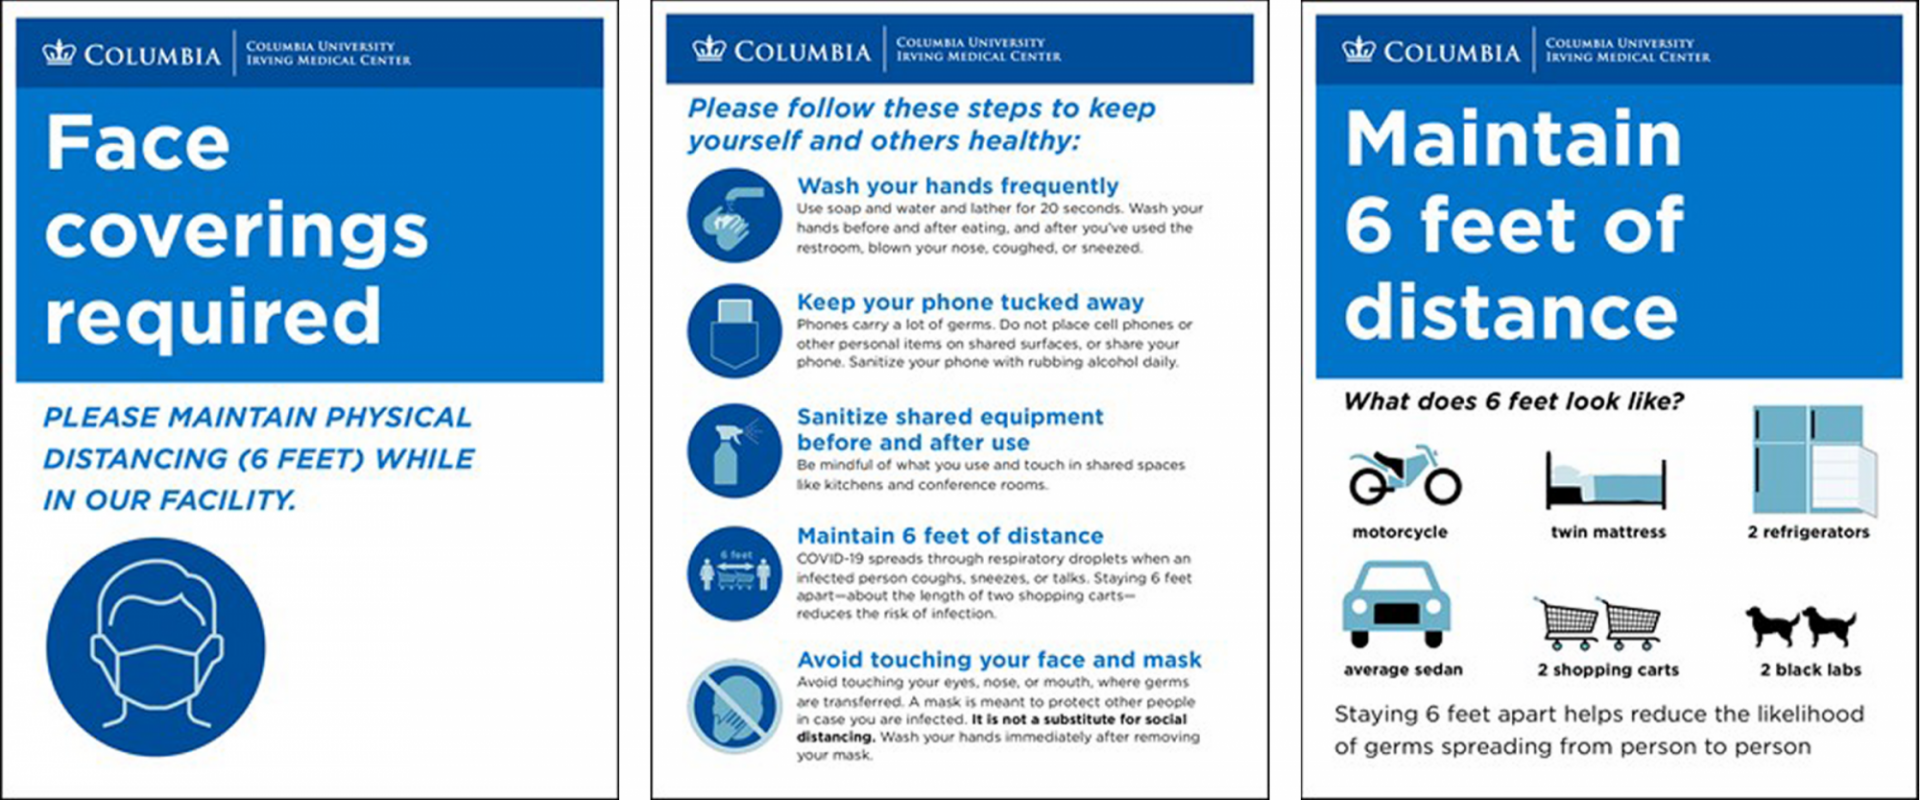 Examples of signage at the Irving Medical Center detailing COVID health and safety requirements